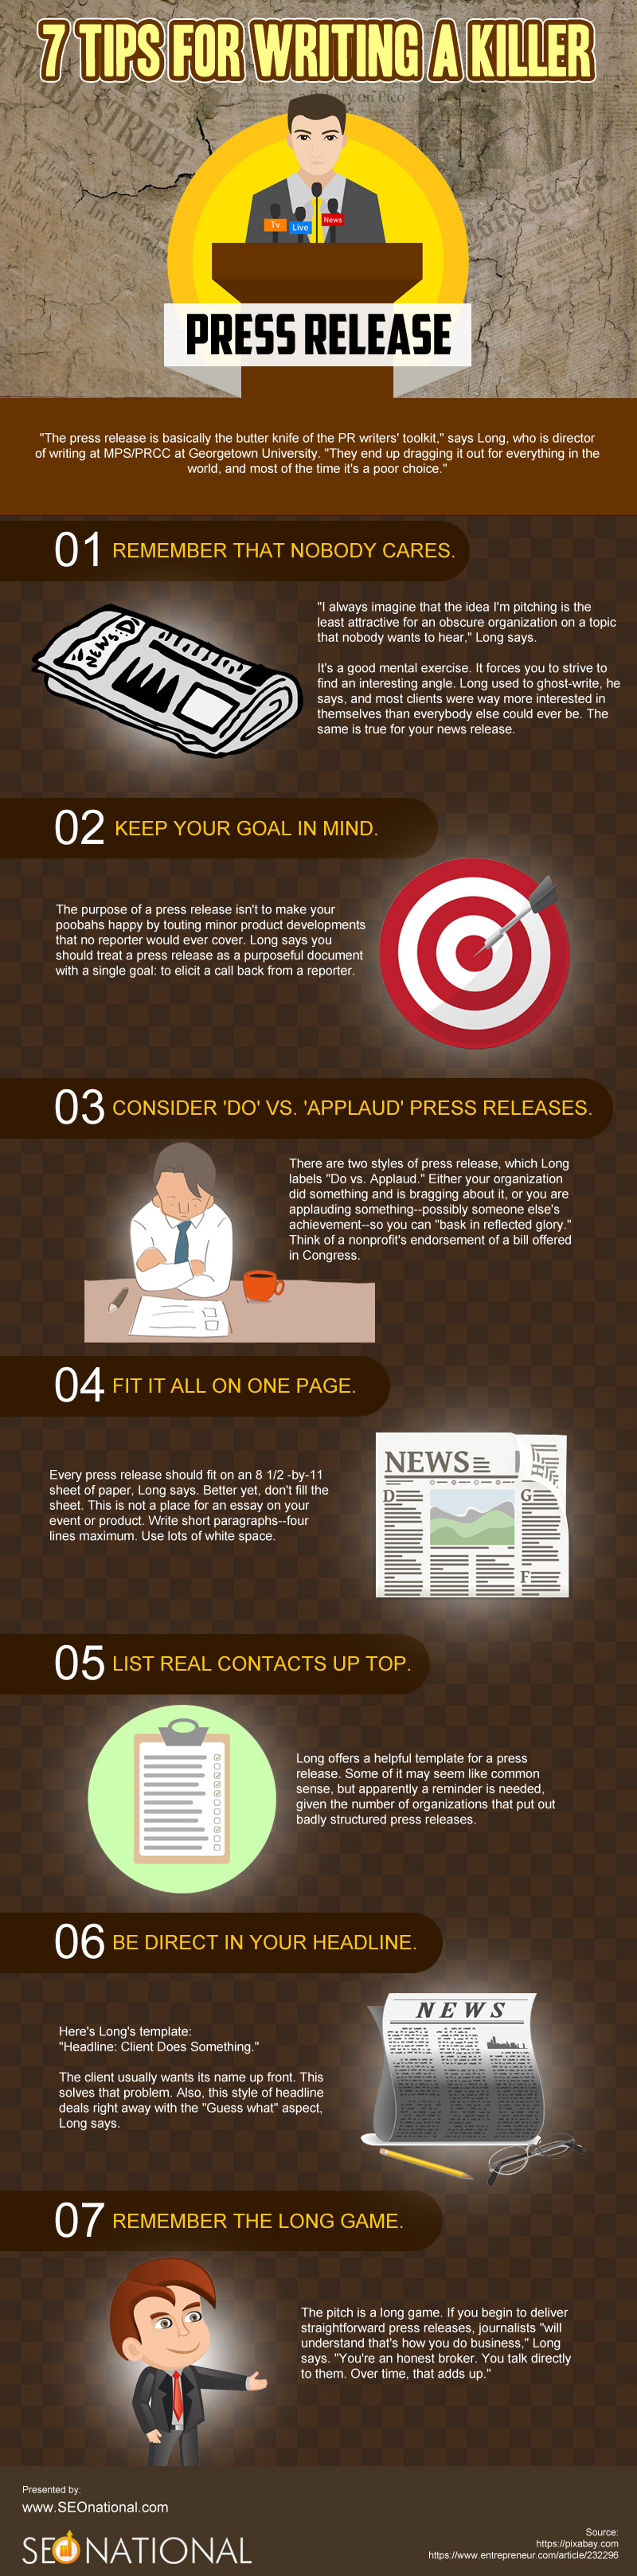 Top Tips for Press Release Writing